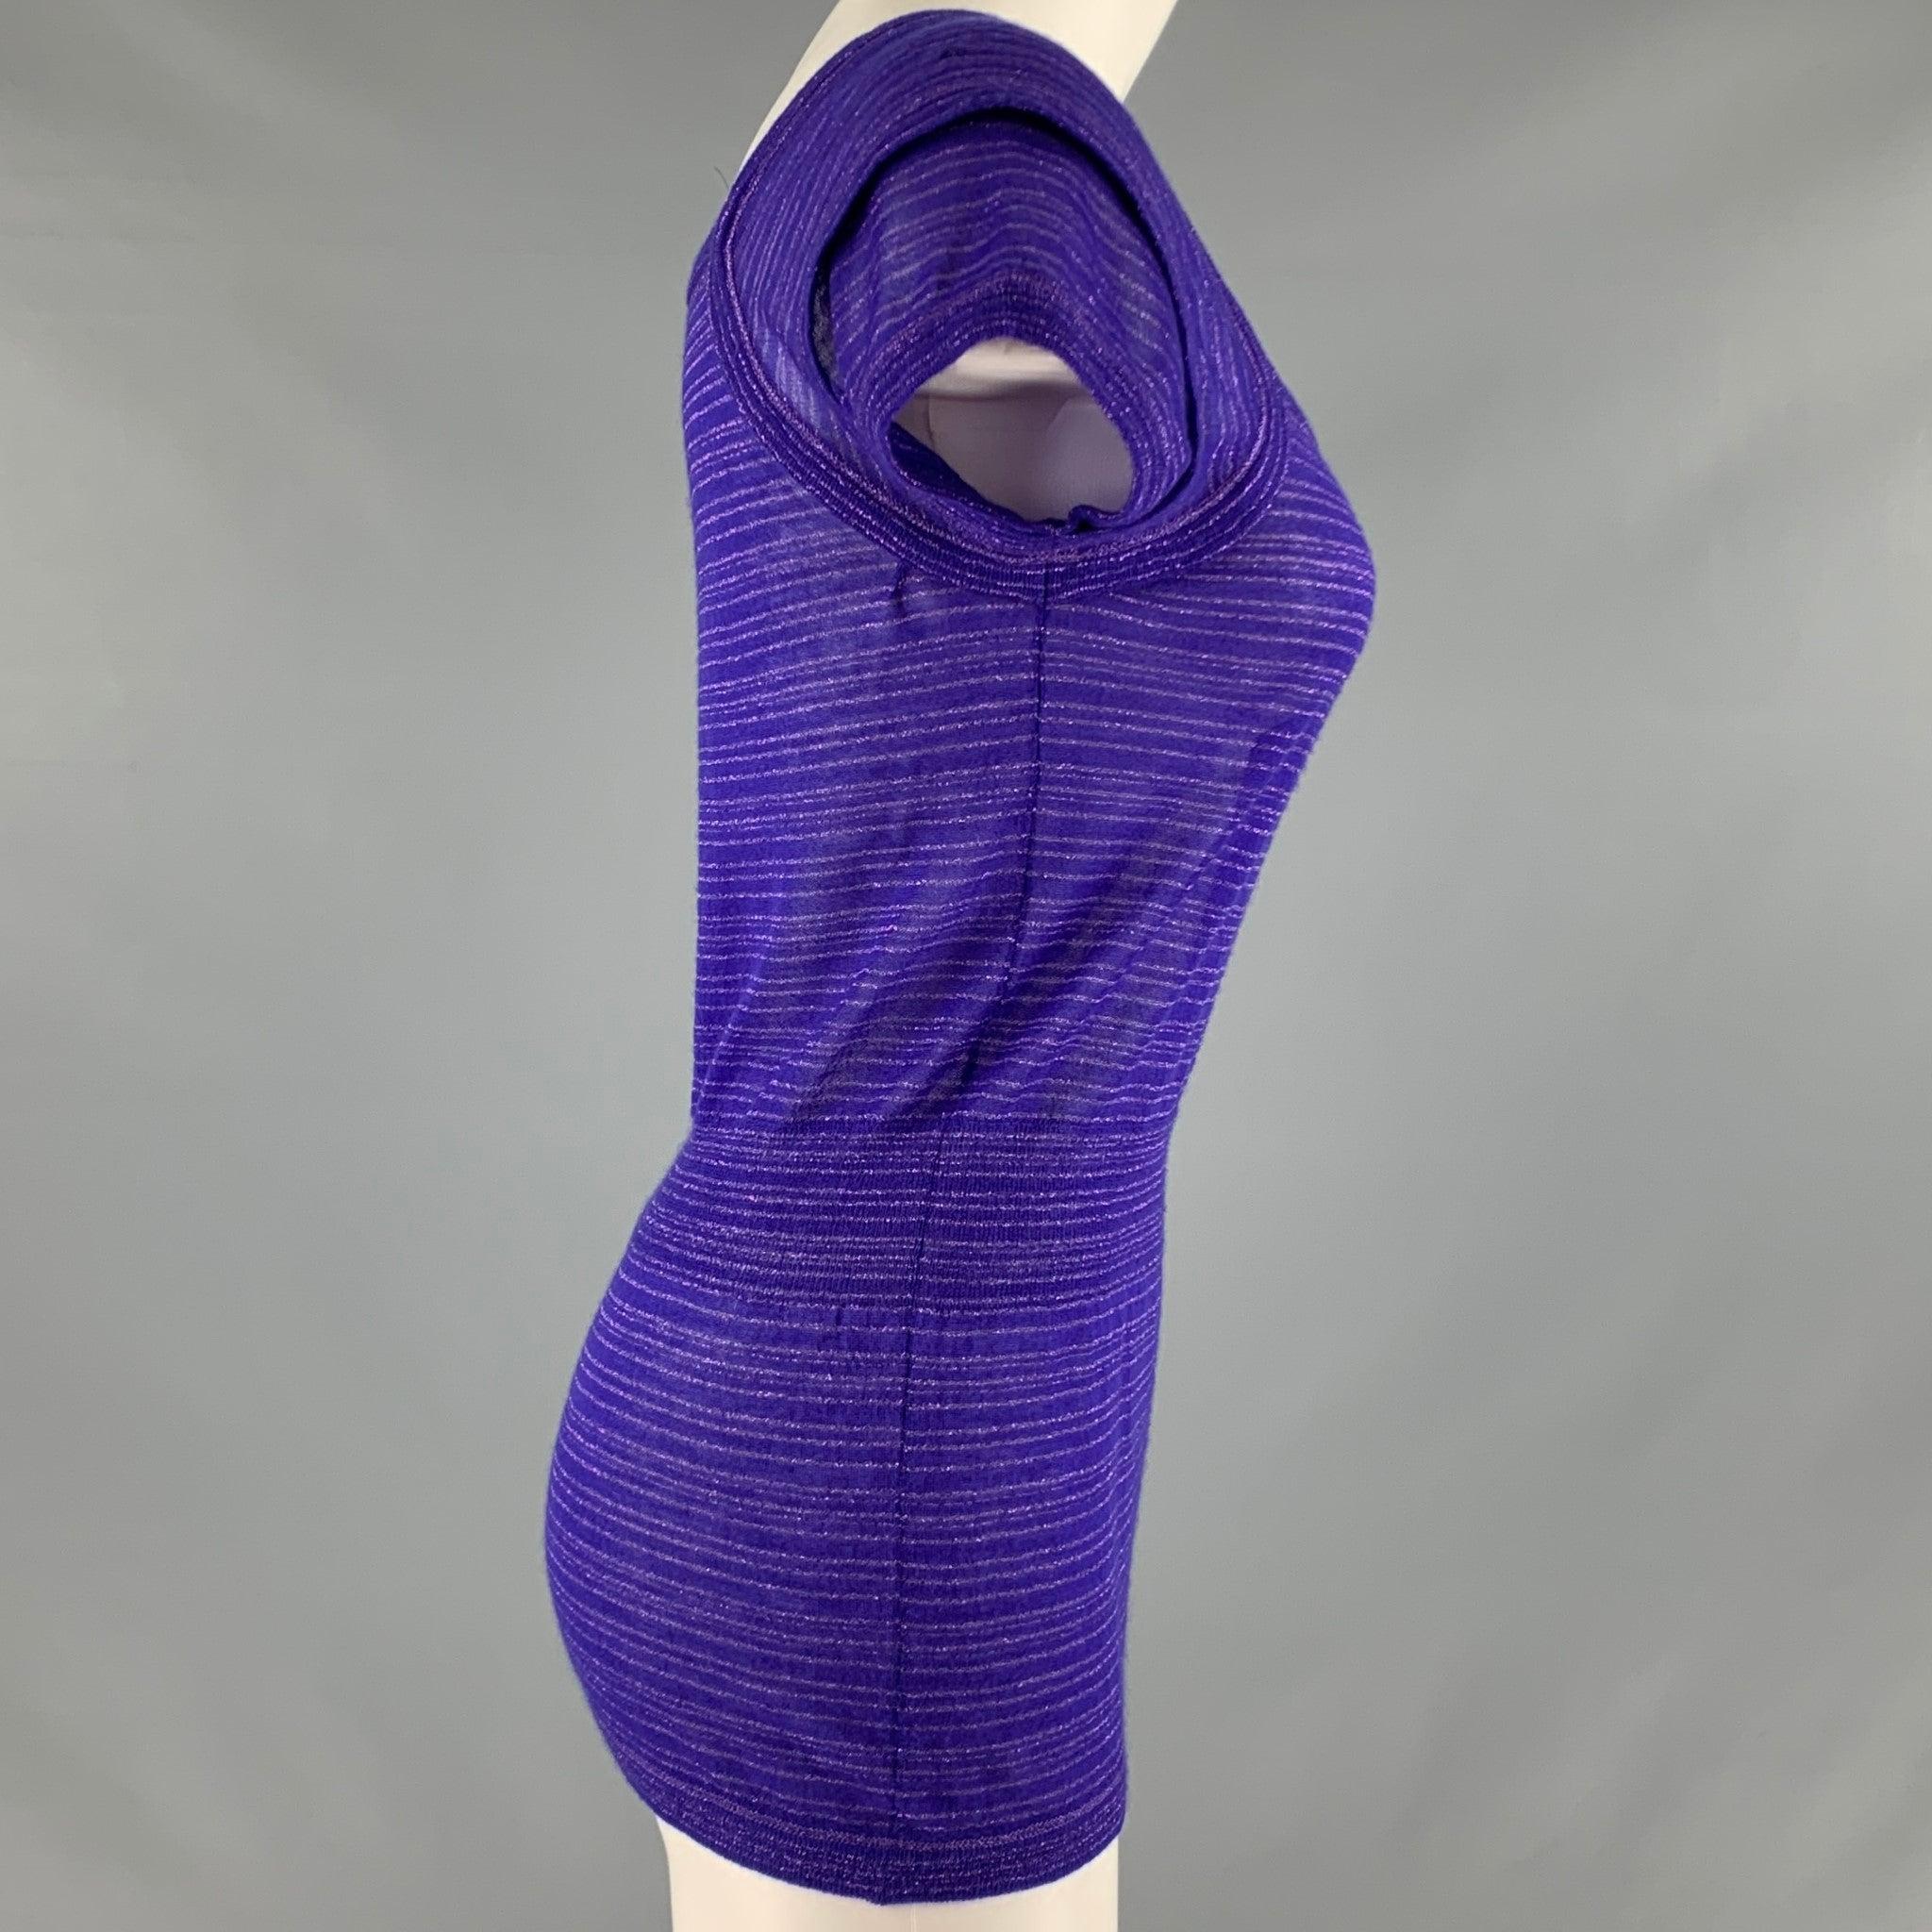 LOUIS VUITTON casual top comes in a purple cashmere blend knit material featuring a novelty metallic accents, and short sleeves. Made in Italy. Good Pre-Owned Condition. Moderate signs of wear, please check photos. 

Marked:   S 

Measurements: 
